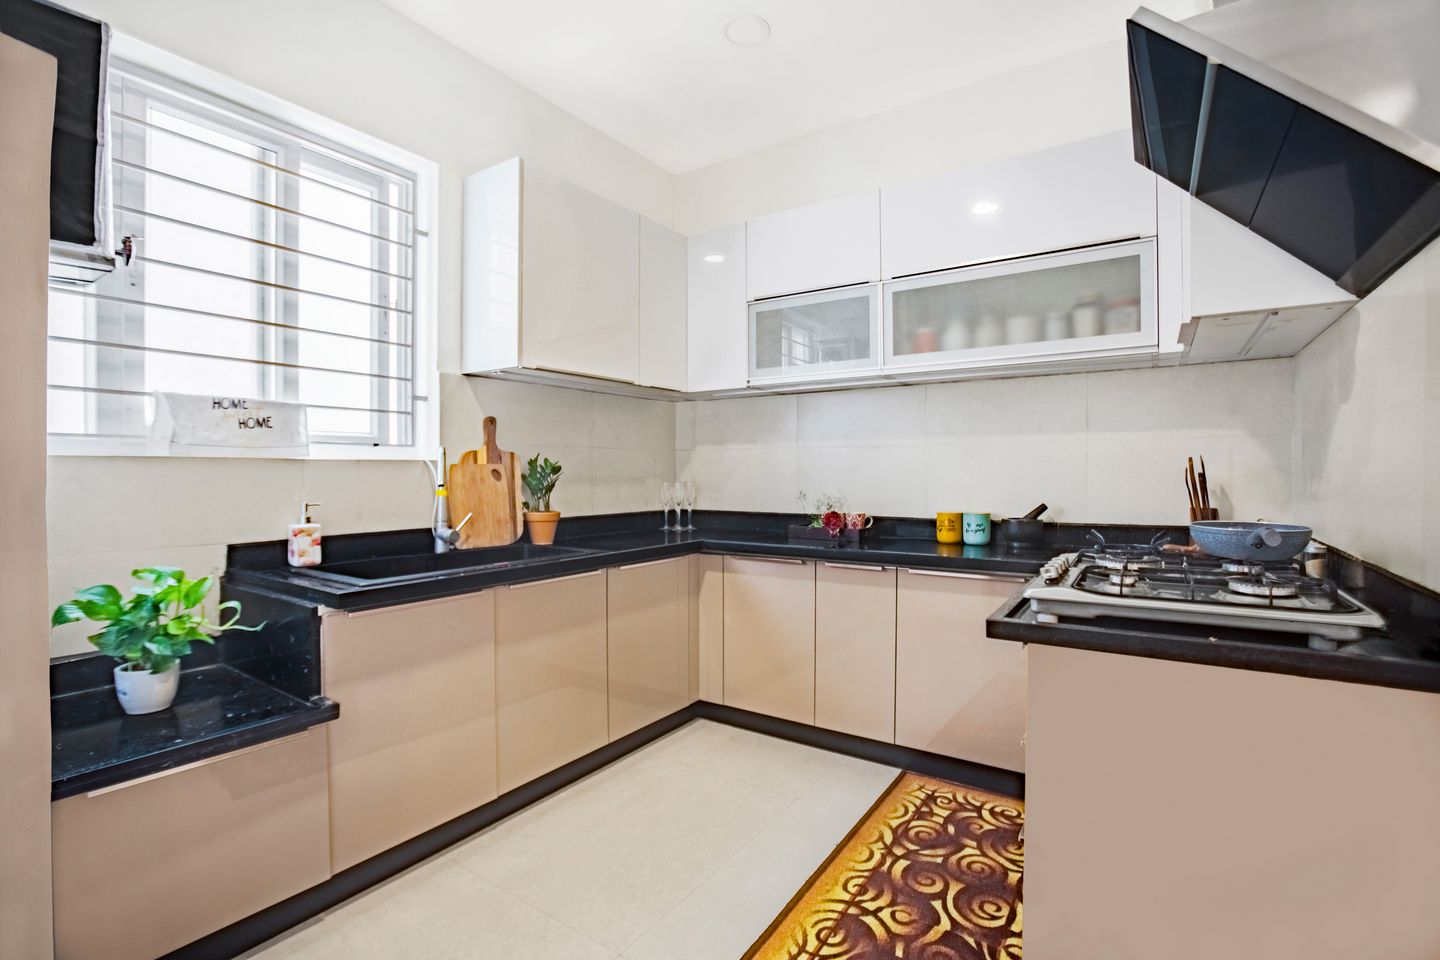 Traditional 2-BHK Flat In Chennai With U-Shaped Kitchen